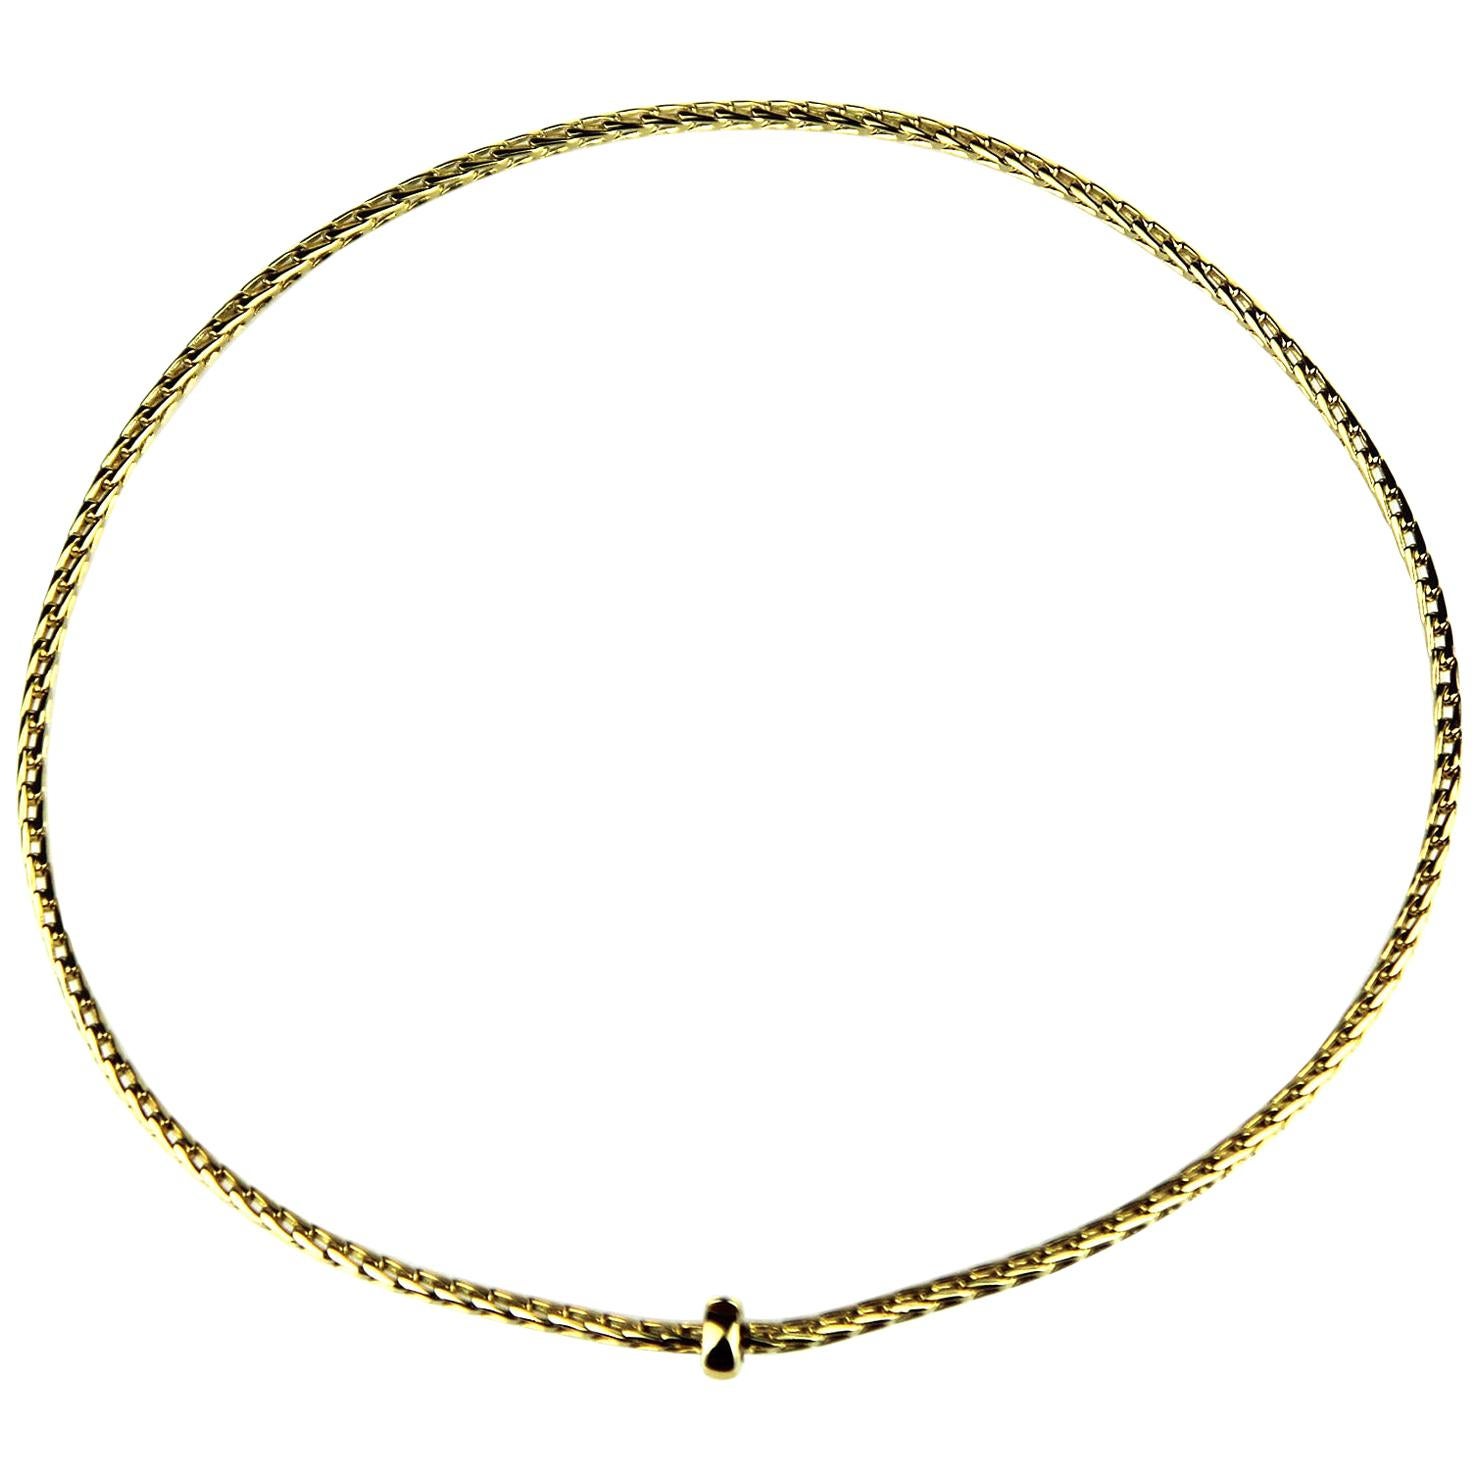 Pomellato Chain/Necklace in 18 Carat Yellow Gold, Gents/Ladies